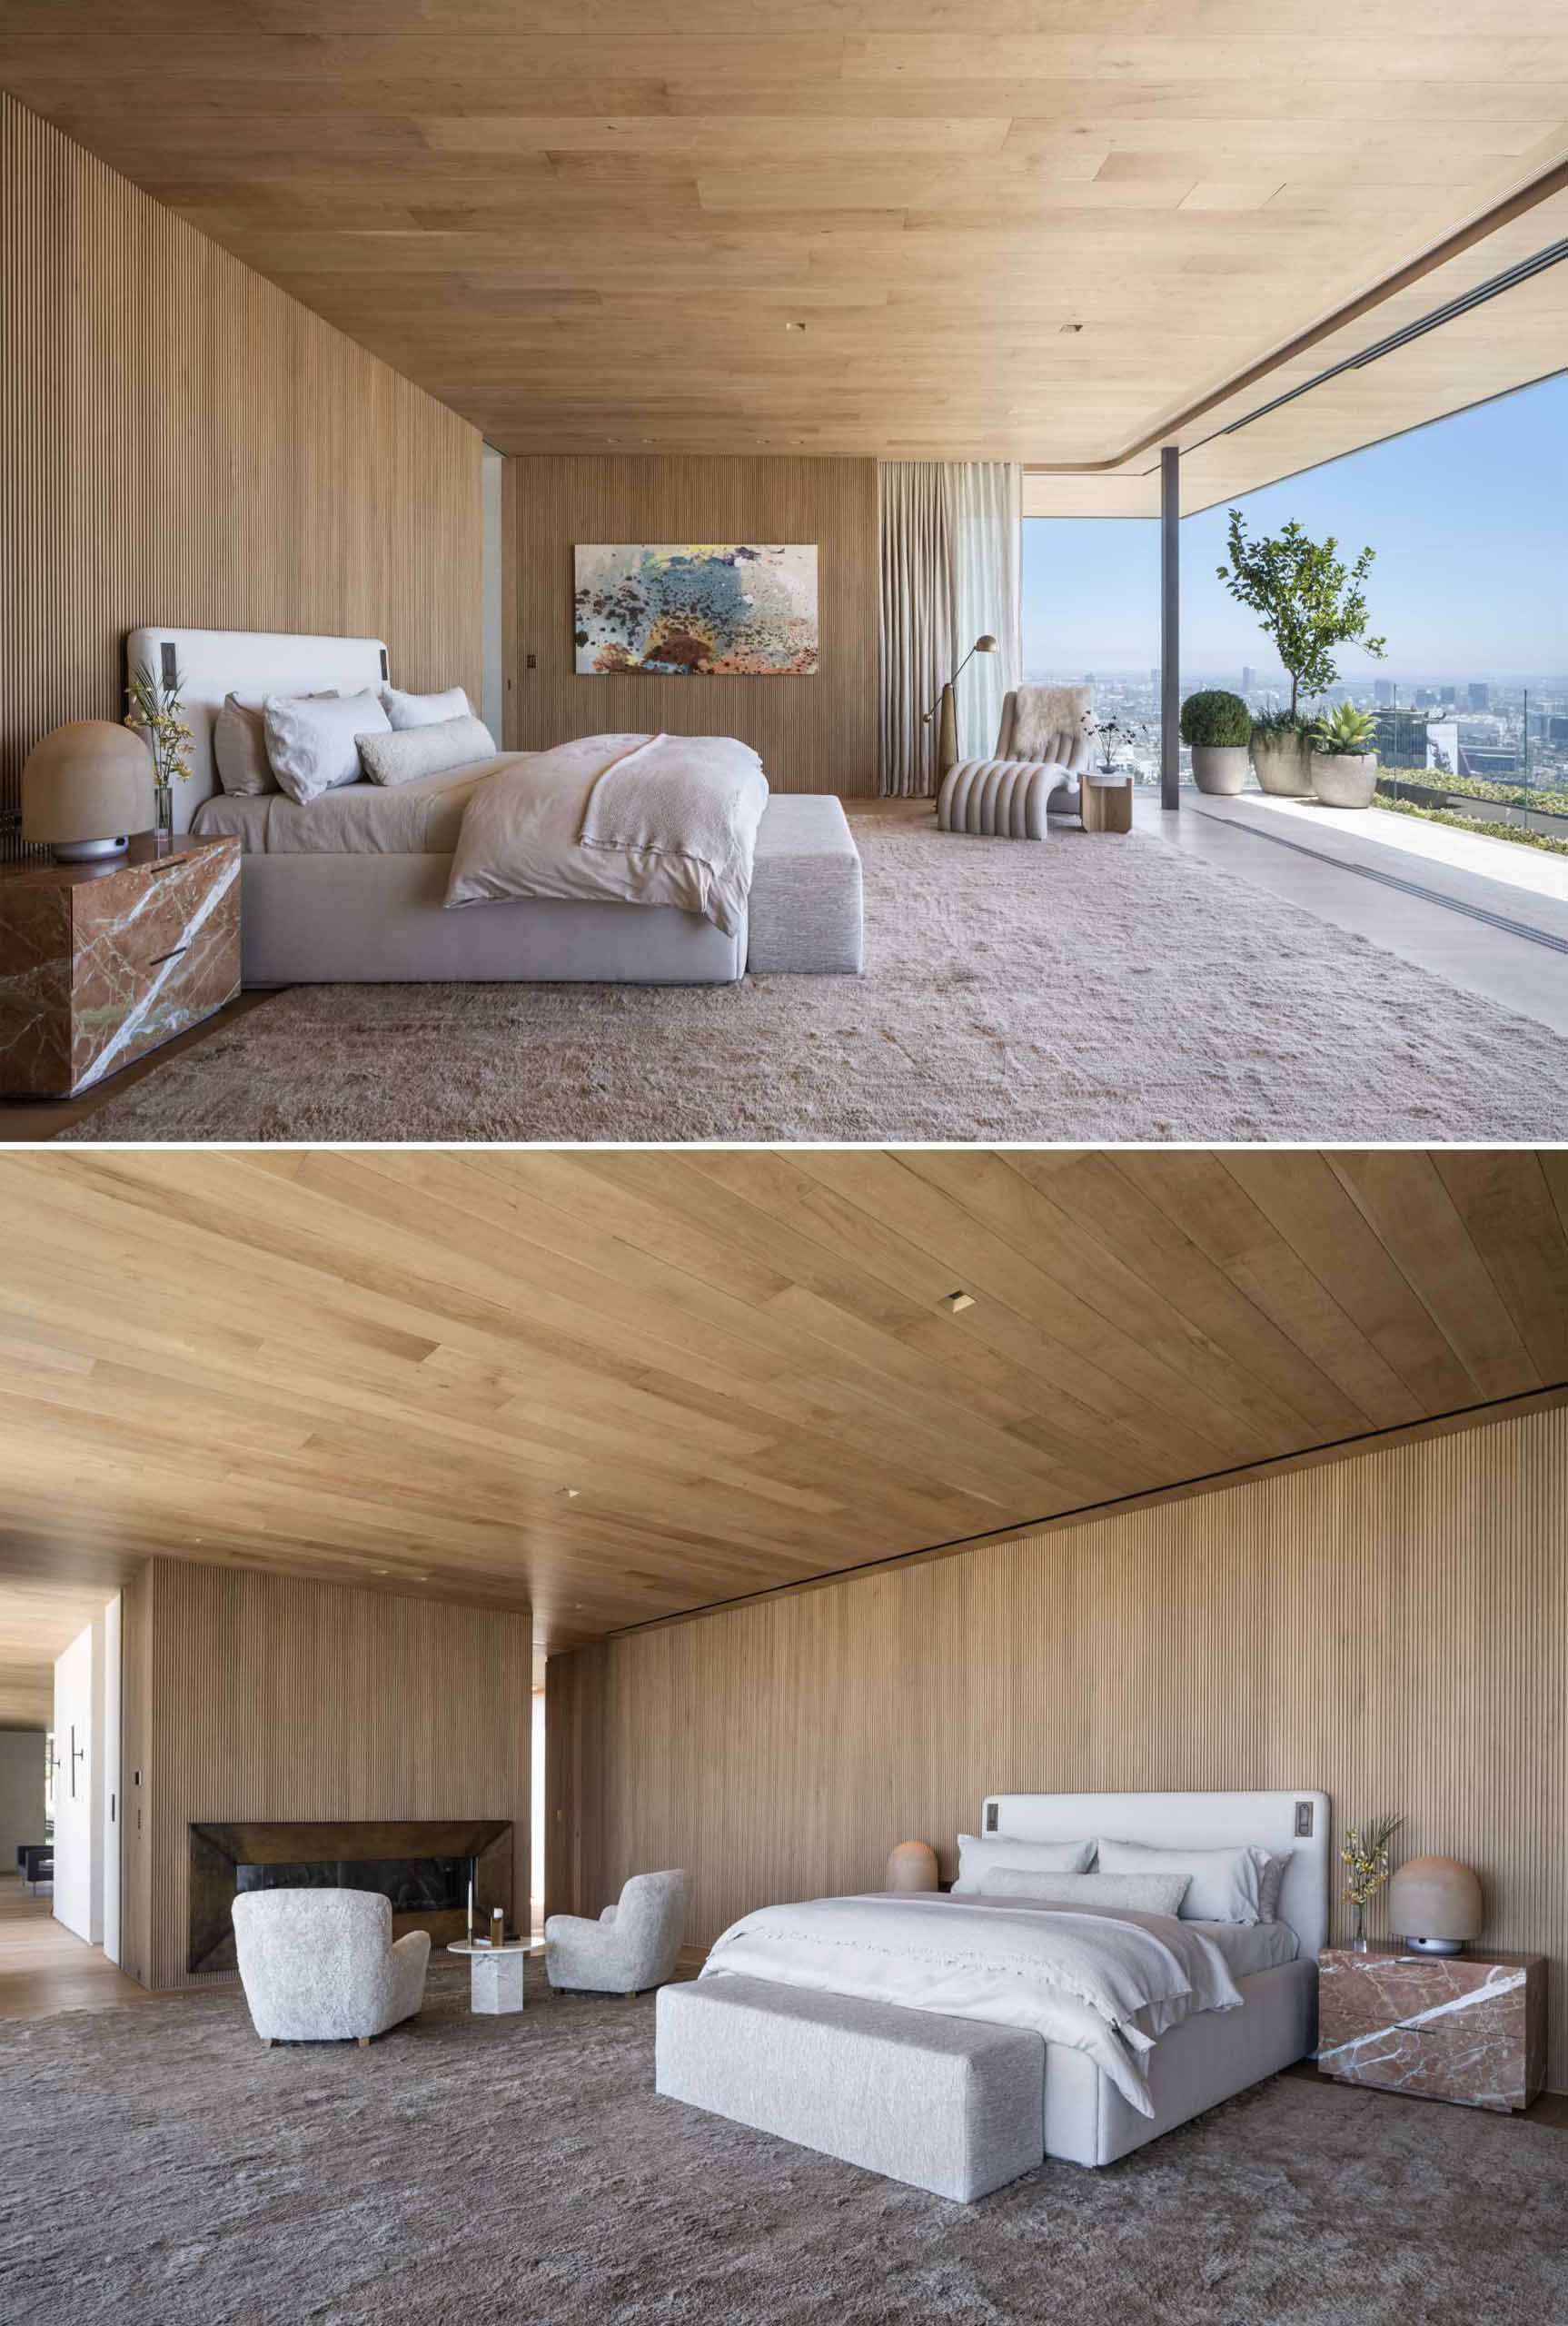 A modern wood-lined bedroom interior with a fireplace and glass wall that opens to a balcony.